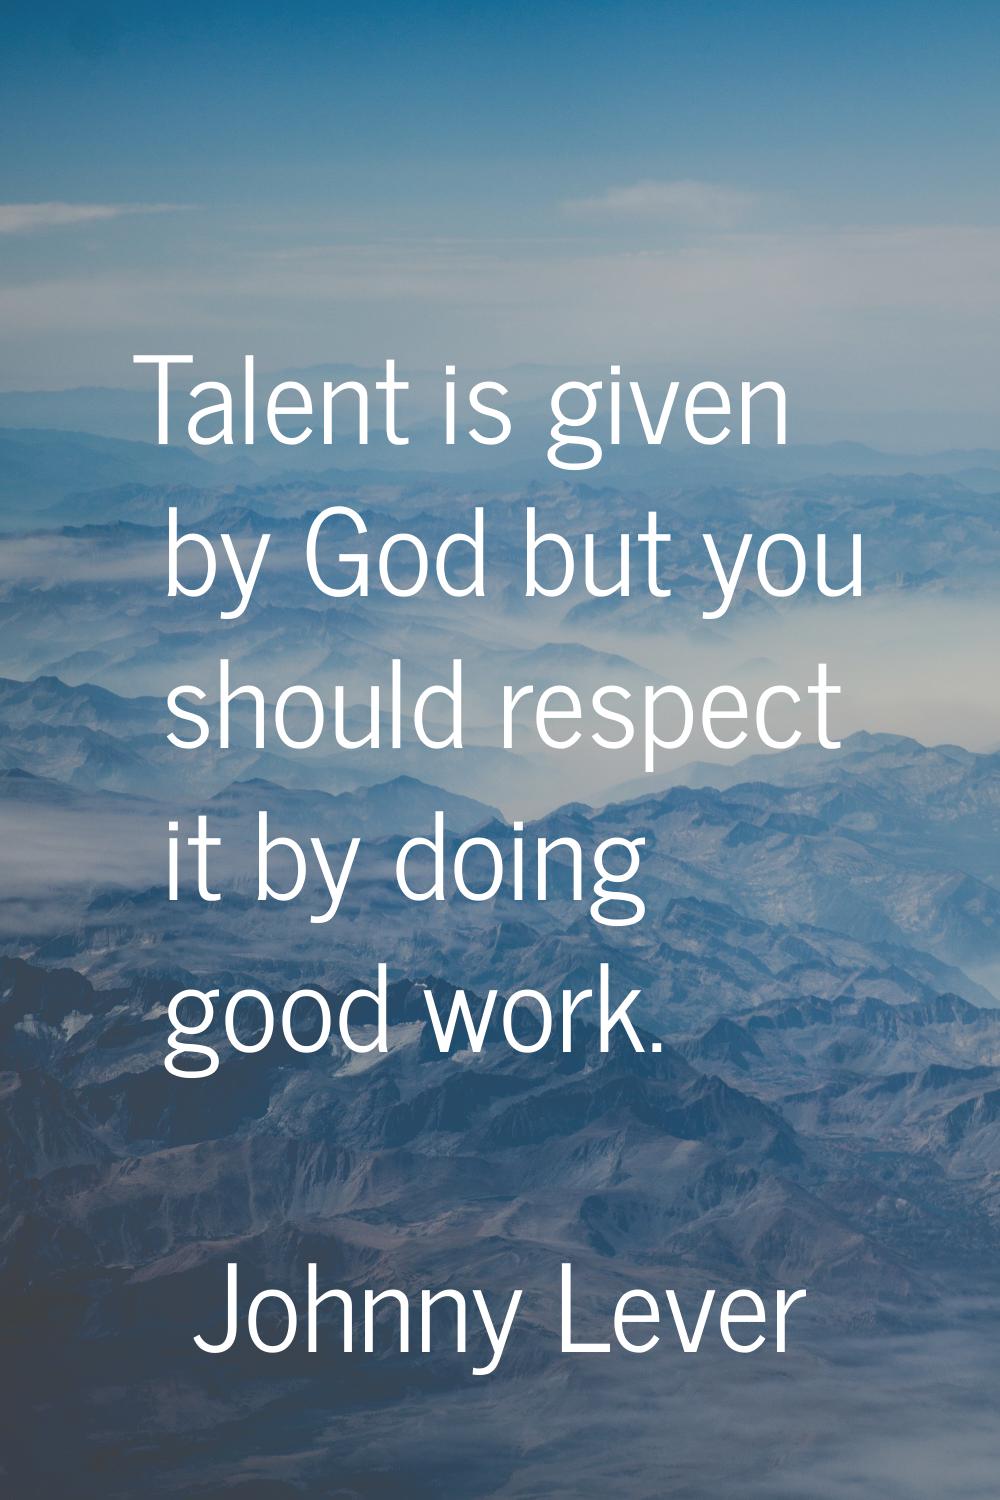 Talent is given by God but you should respect it by doing good work.